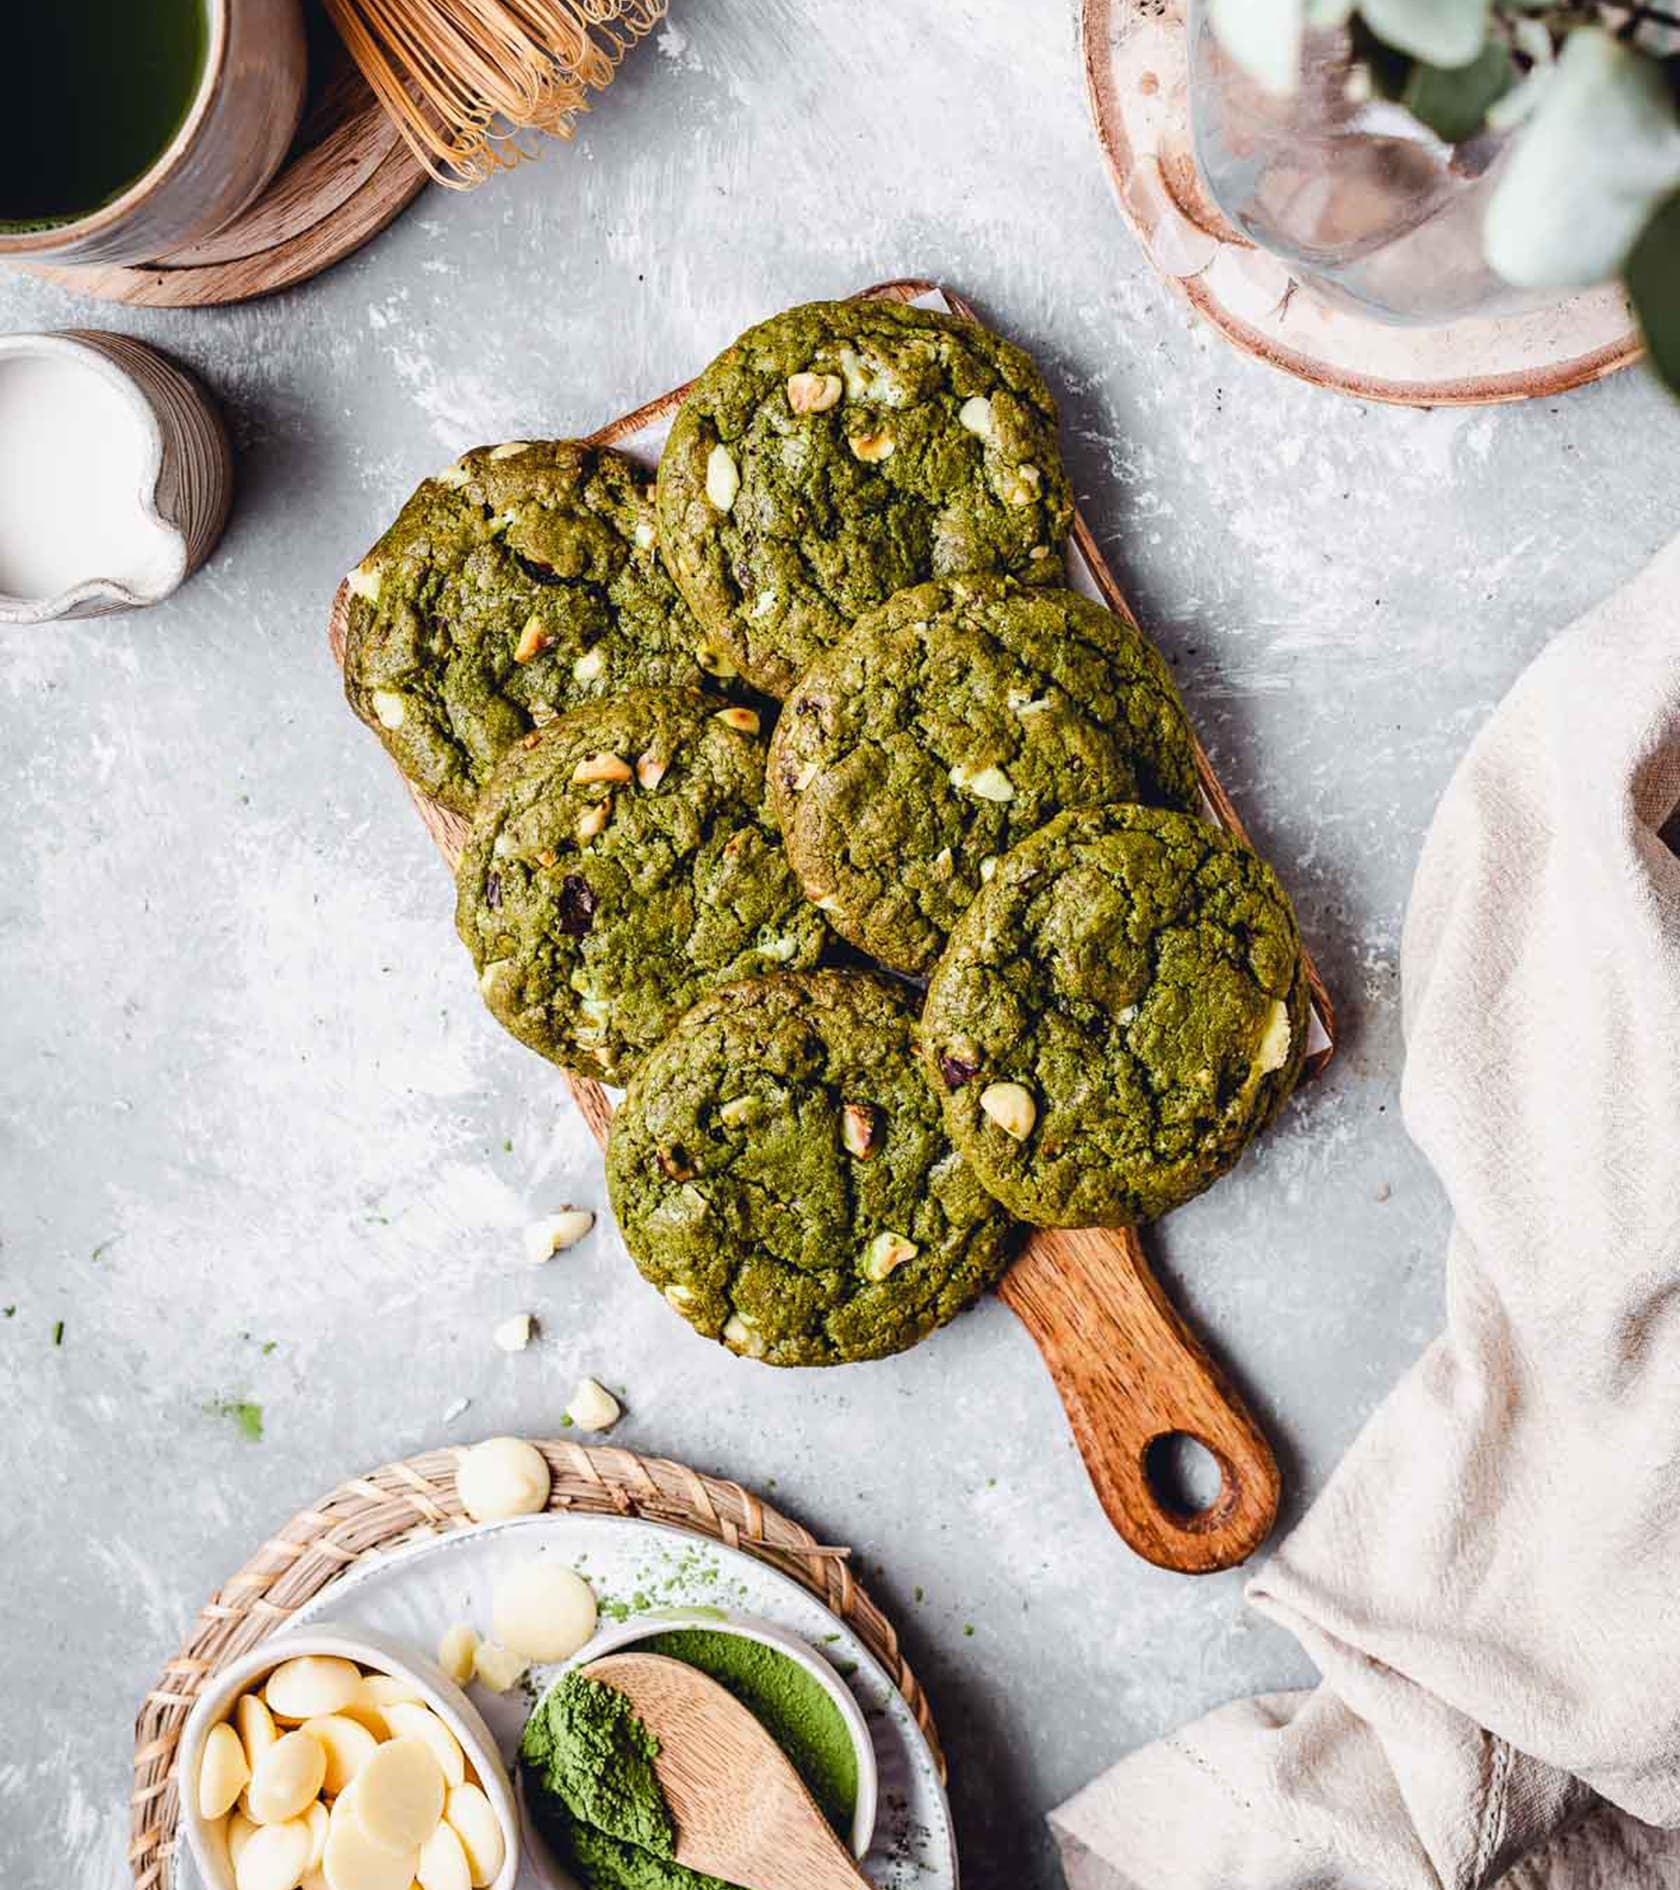 4 Unique Matcha Recipes You Need to Try